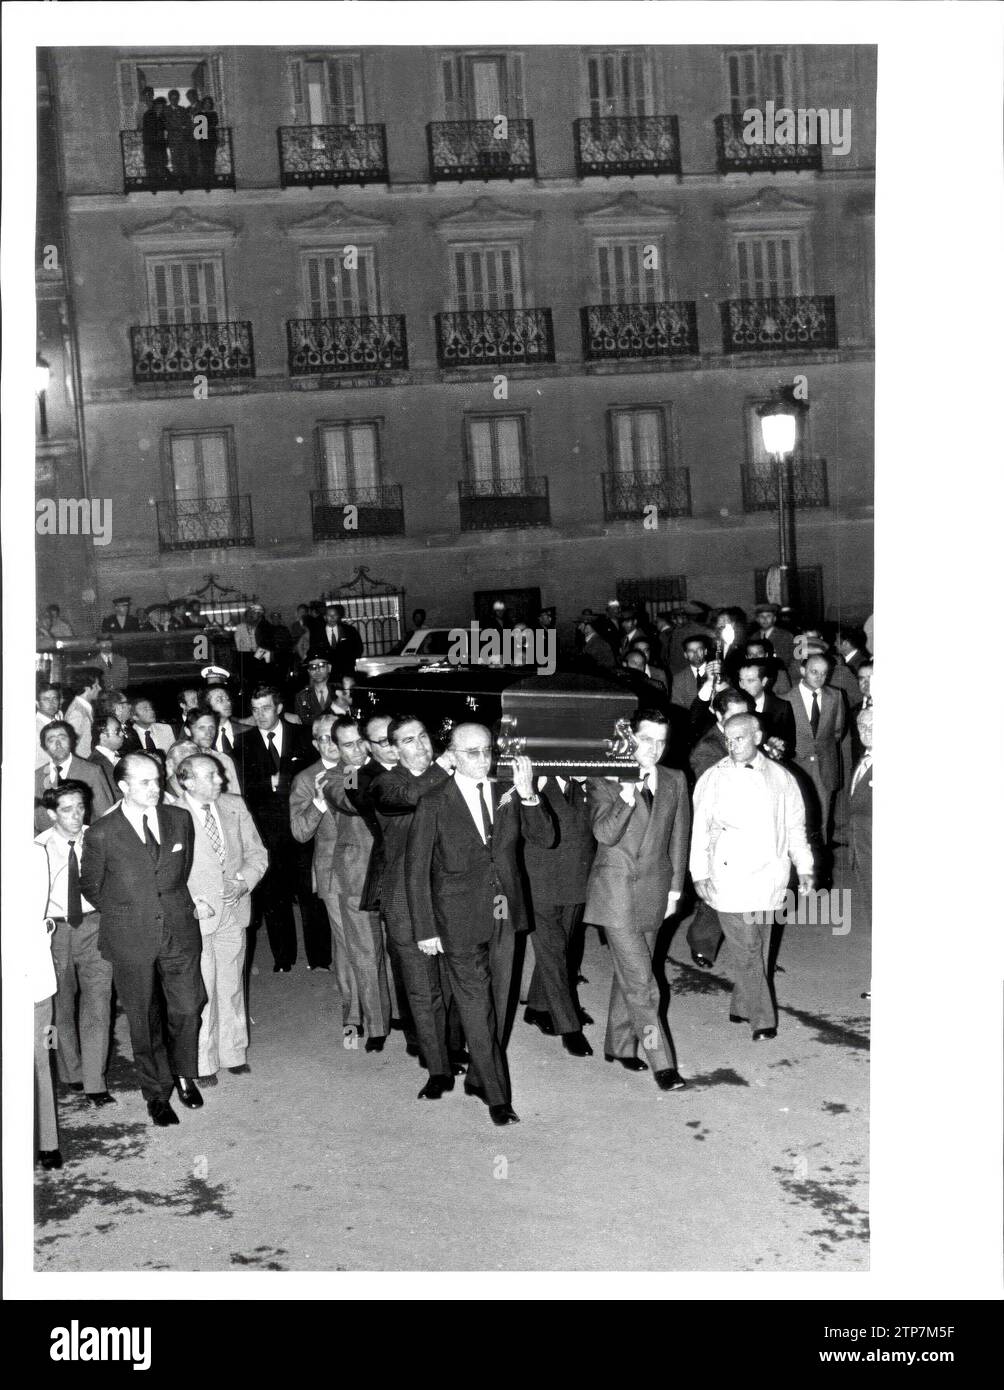 06/12/1975. The Mortal Remains of Mr. Fernando blacksmith weaver arrive at dawn at the headquarters of the national council of the Movement, where the Burning Carpilla would be installed. Among the Bearers, Adolfo Suárez. Credit: Album / Archivo ABC / Luis Alonso Stock Photo